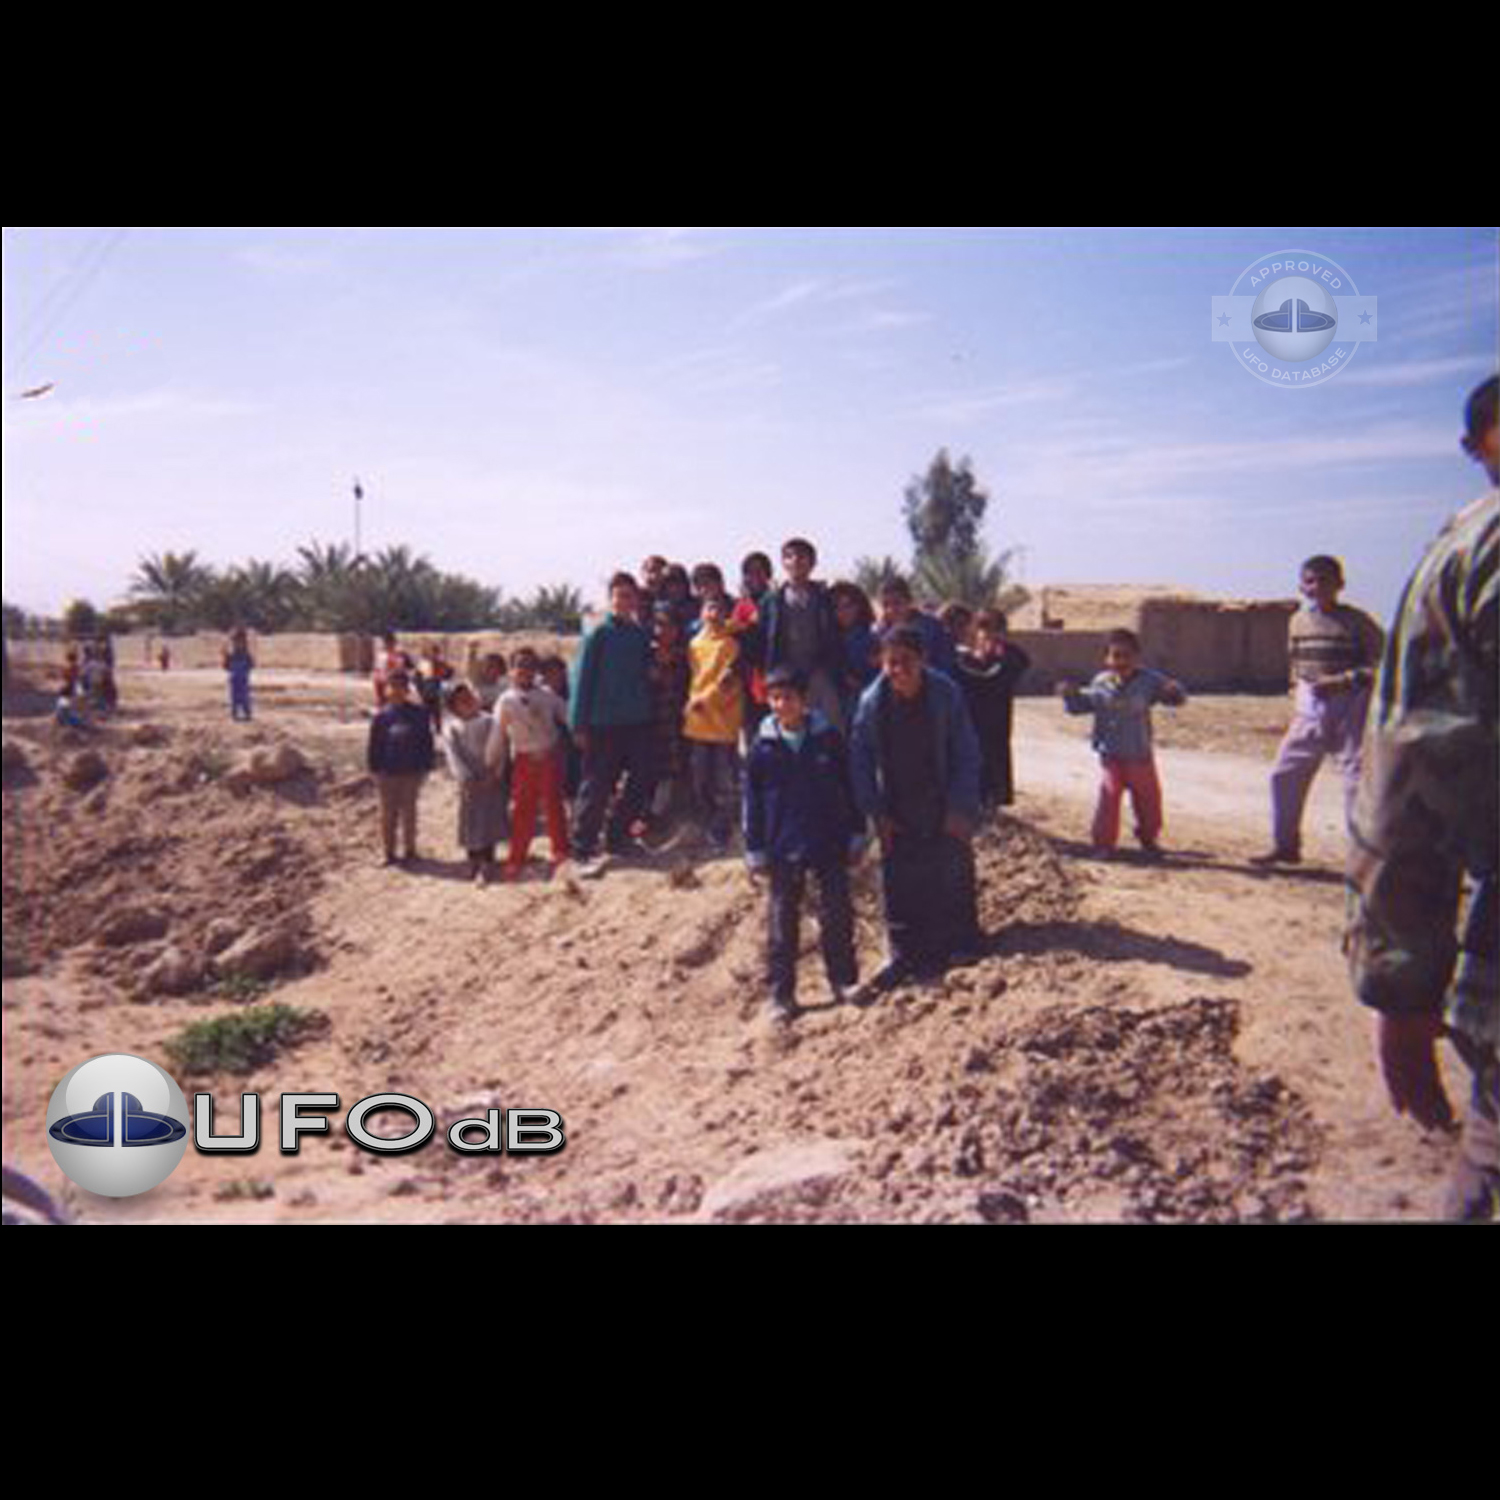 UFO seen passing over Kids in Baghdad, Iraq | April 03 2004 UFO Picture #199-1